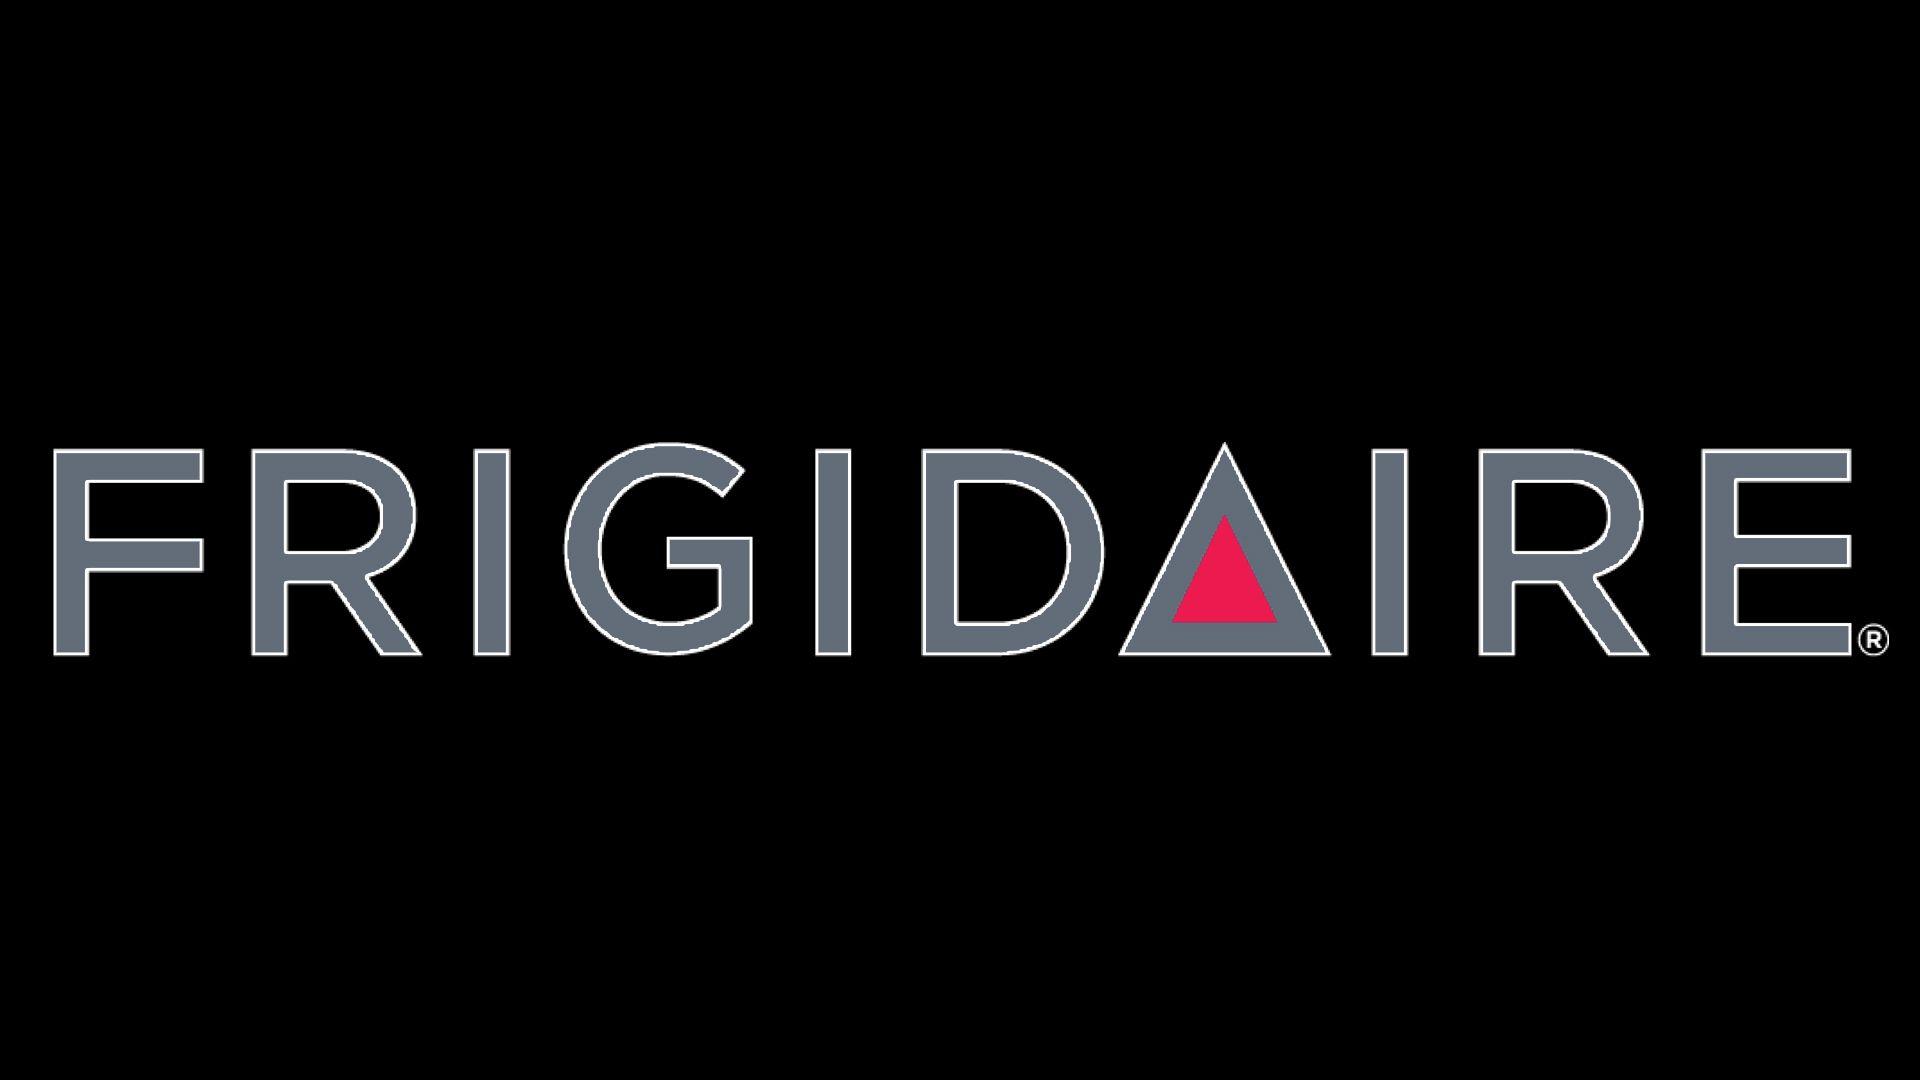 Frigidaire Logo - Frigidaire Logo, Frigidaire Symbol, Meaning, History and Evolution